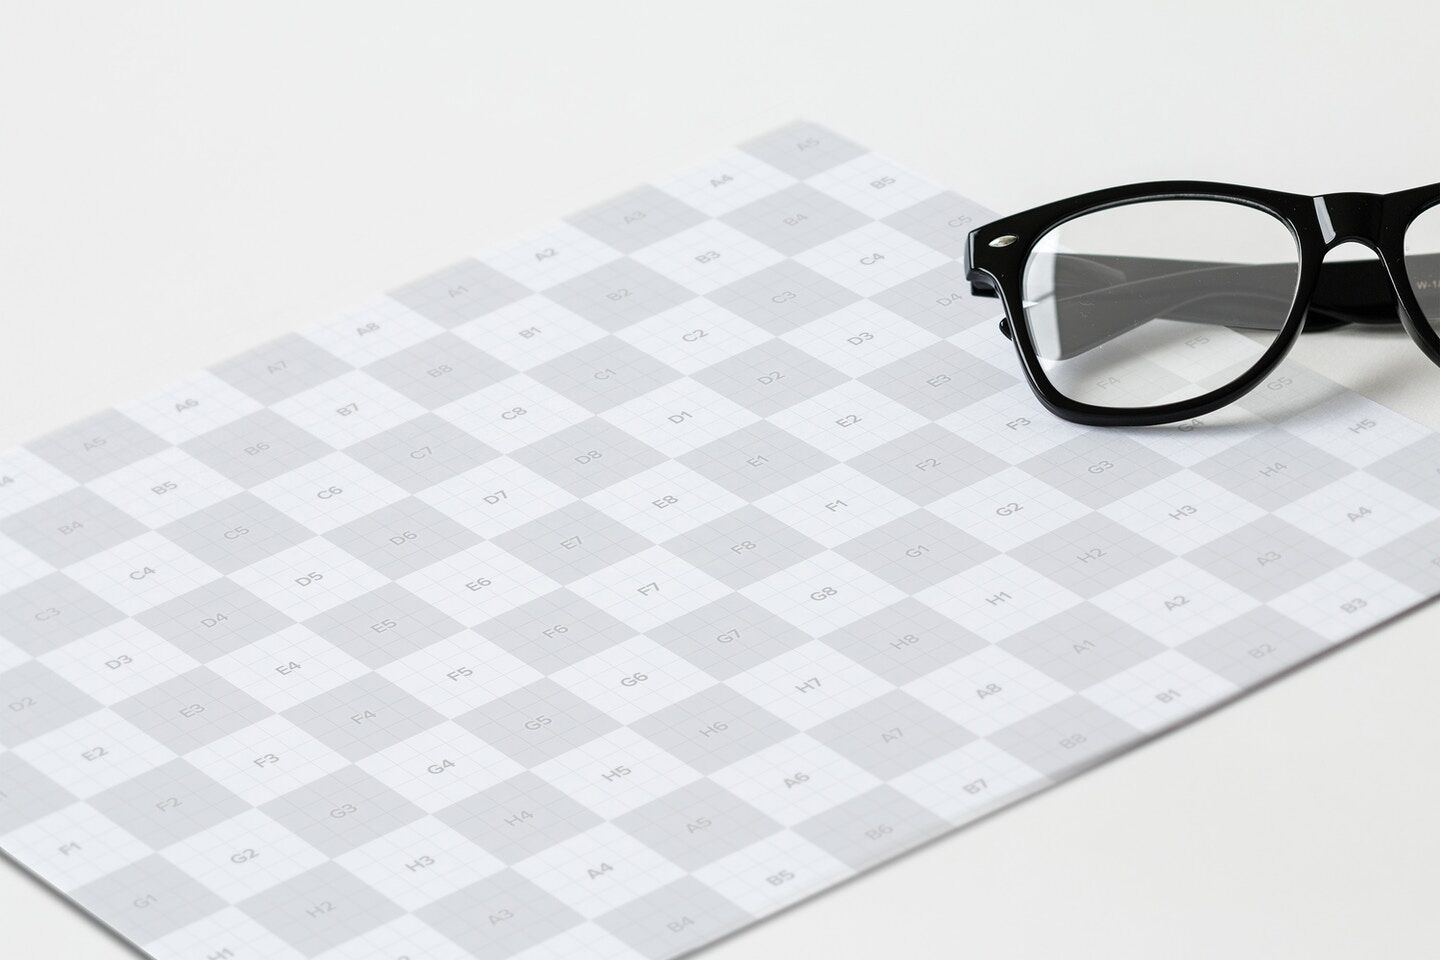 Letterhead Mockup With A Glasses FREE PSD